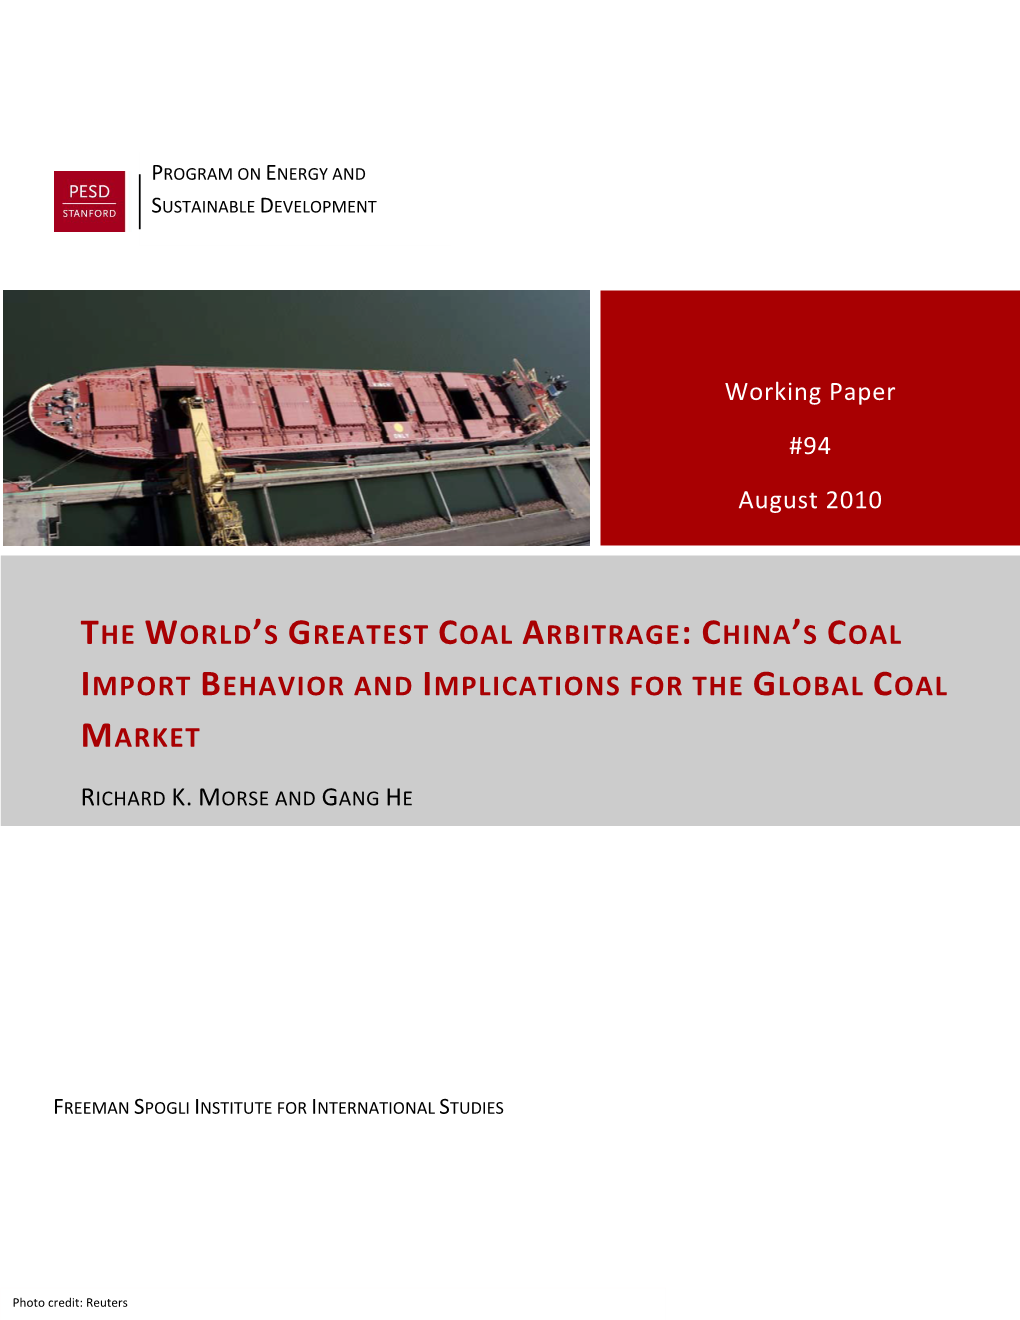 China's Coal Import Behavior and Implications for The